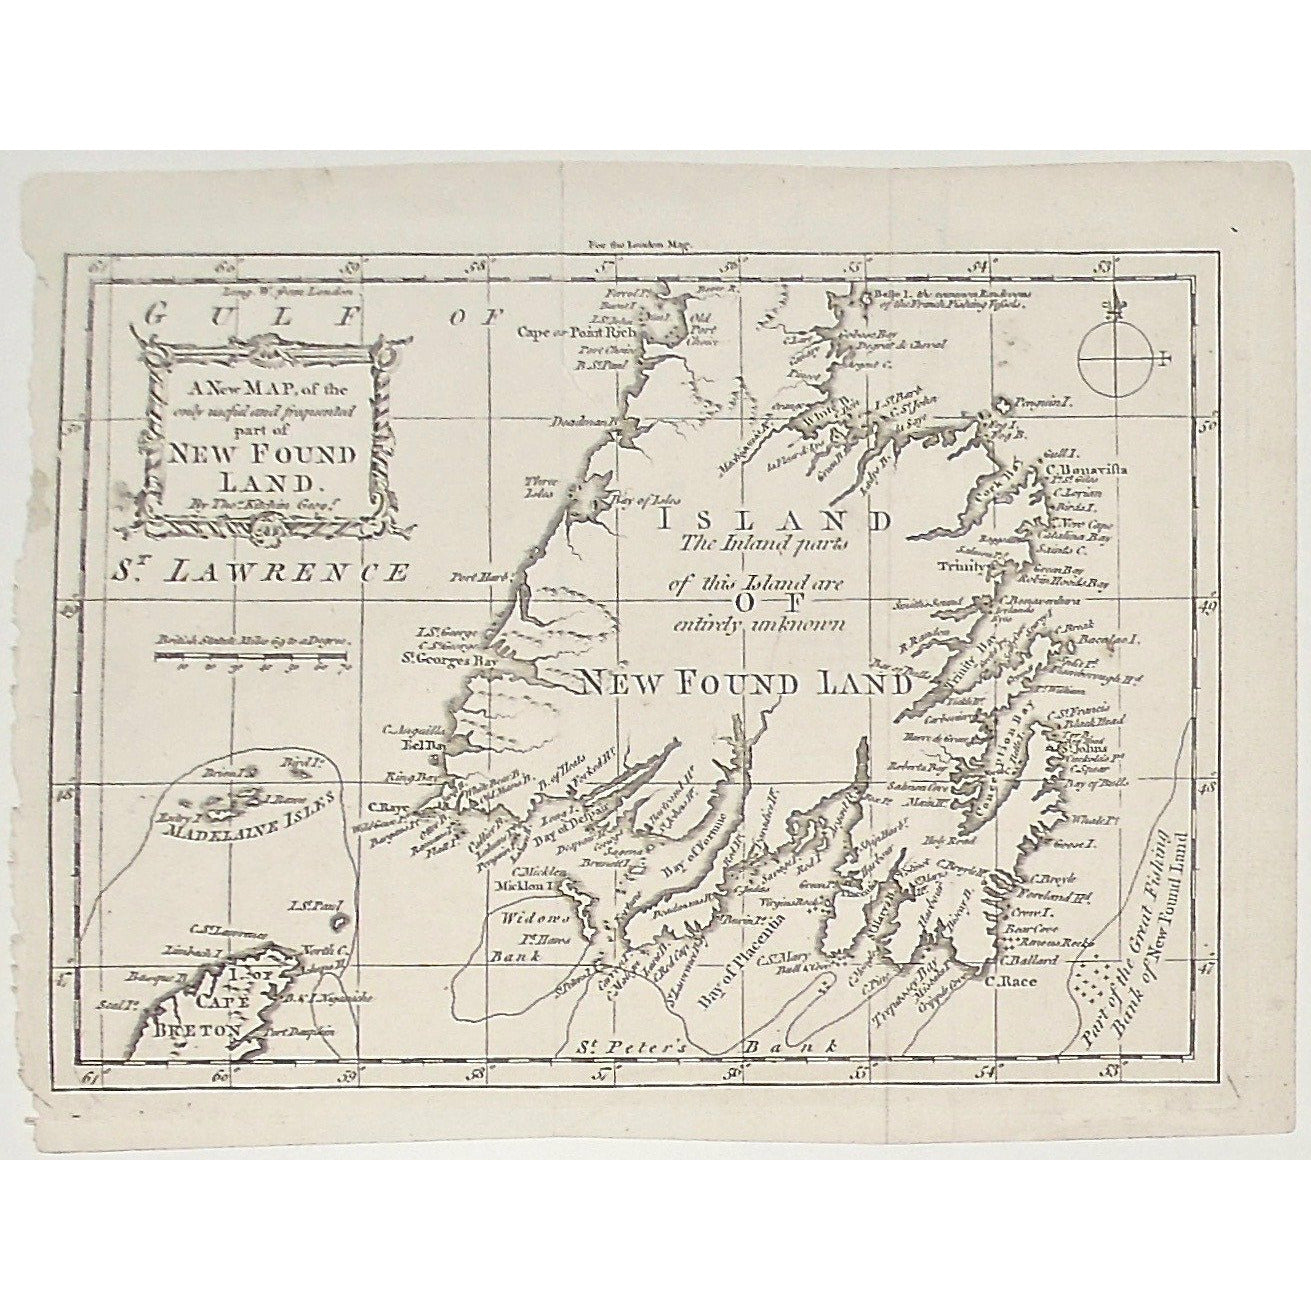 Map, Maps, Mapping, gulf, Gulf of St. Lawrence, St. Lawrence, New Foundland, Newfoundland, Ferrol Point, Burnt Island, Isle St. Jean, Island of St. John, St. Johns, Island, Cape rich, Point Rich, Old Port Choice, Beaver River, Deadman Bay, Three Isles, Bay of Isles, Port Harbour, St. George, Isle St. George, St. George's Bay, Cape Anguilla, Eel Bay, Ring Bay, Cape Raye, Wild Geese Island, Bargaus, Islands, Otter Bay, Swift Harbour, White Bear Bay, Old Mans Bay, Bay of Heats, Forked Harbour, Ramaus, Faltt Is